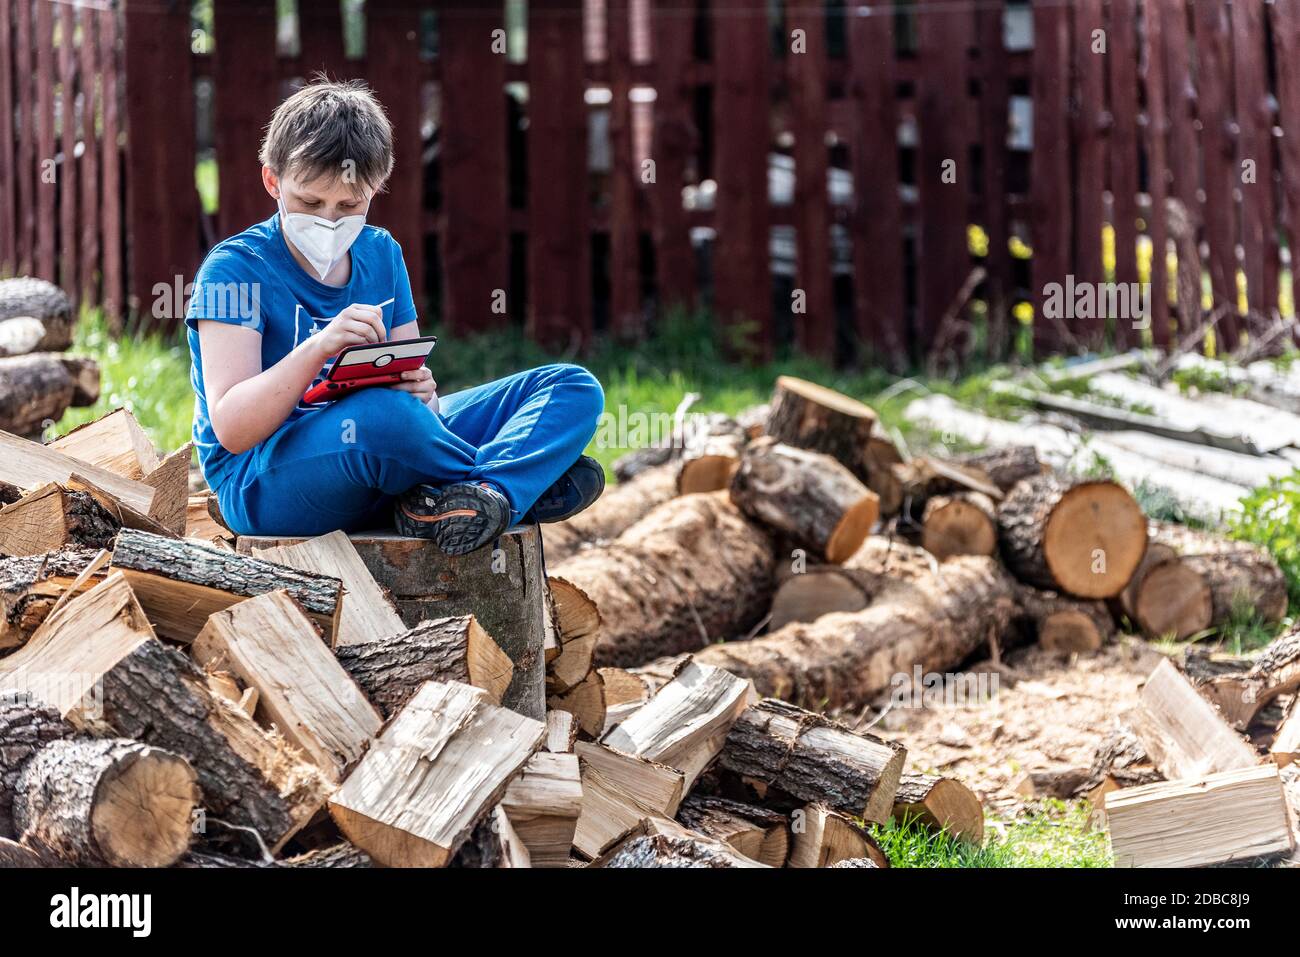 Boy with a protective face mask sitting on a pile of chopped firewood plays with a Nintendo switch console Stock Photo